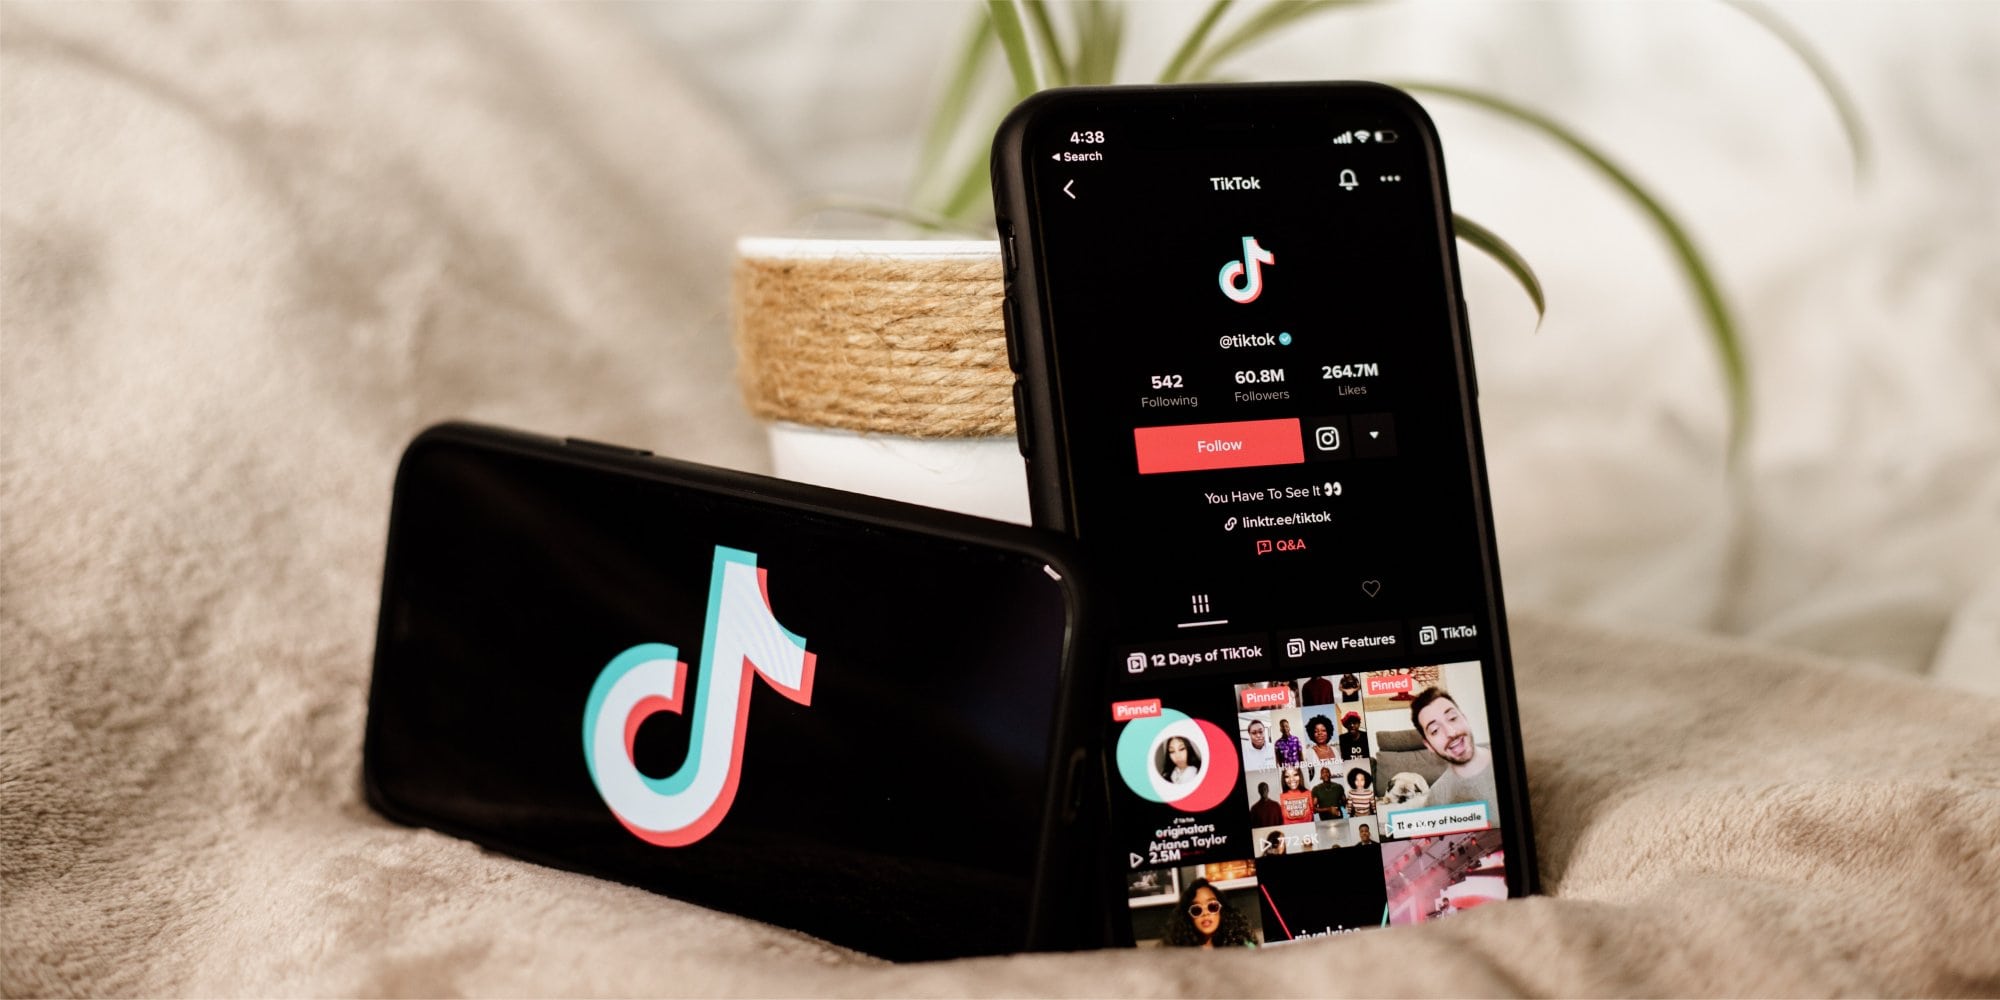  Two phones showing the TikTok app with a variety of videos playing on one and the other showing the 'Following' page.